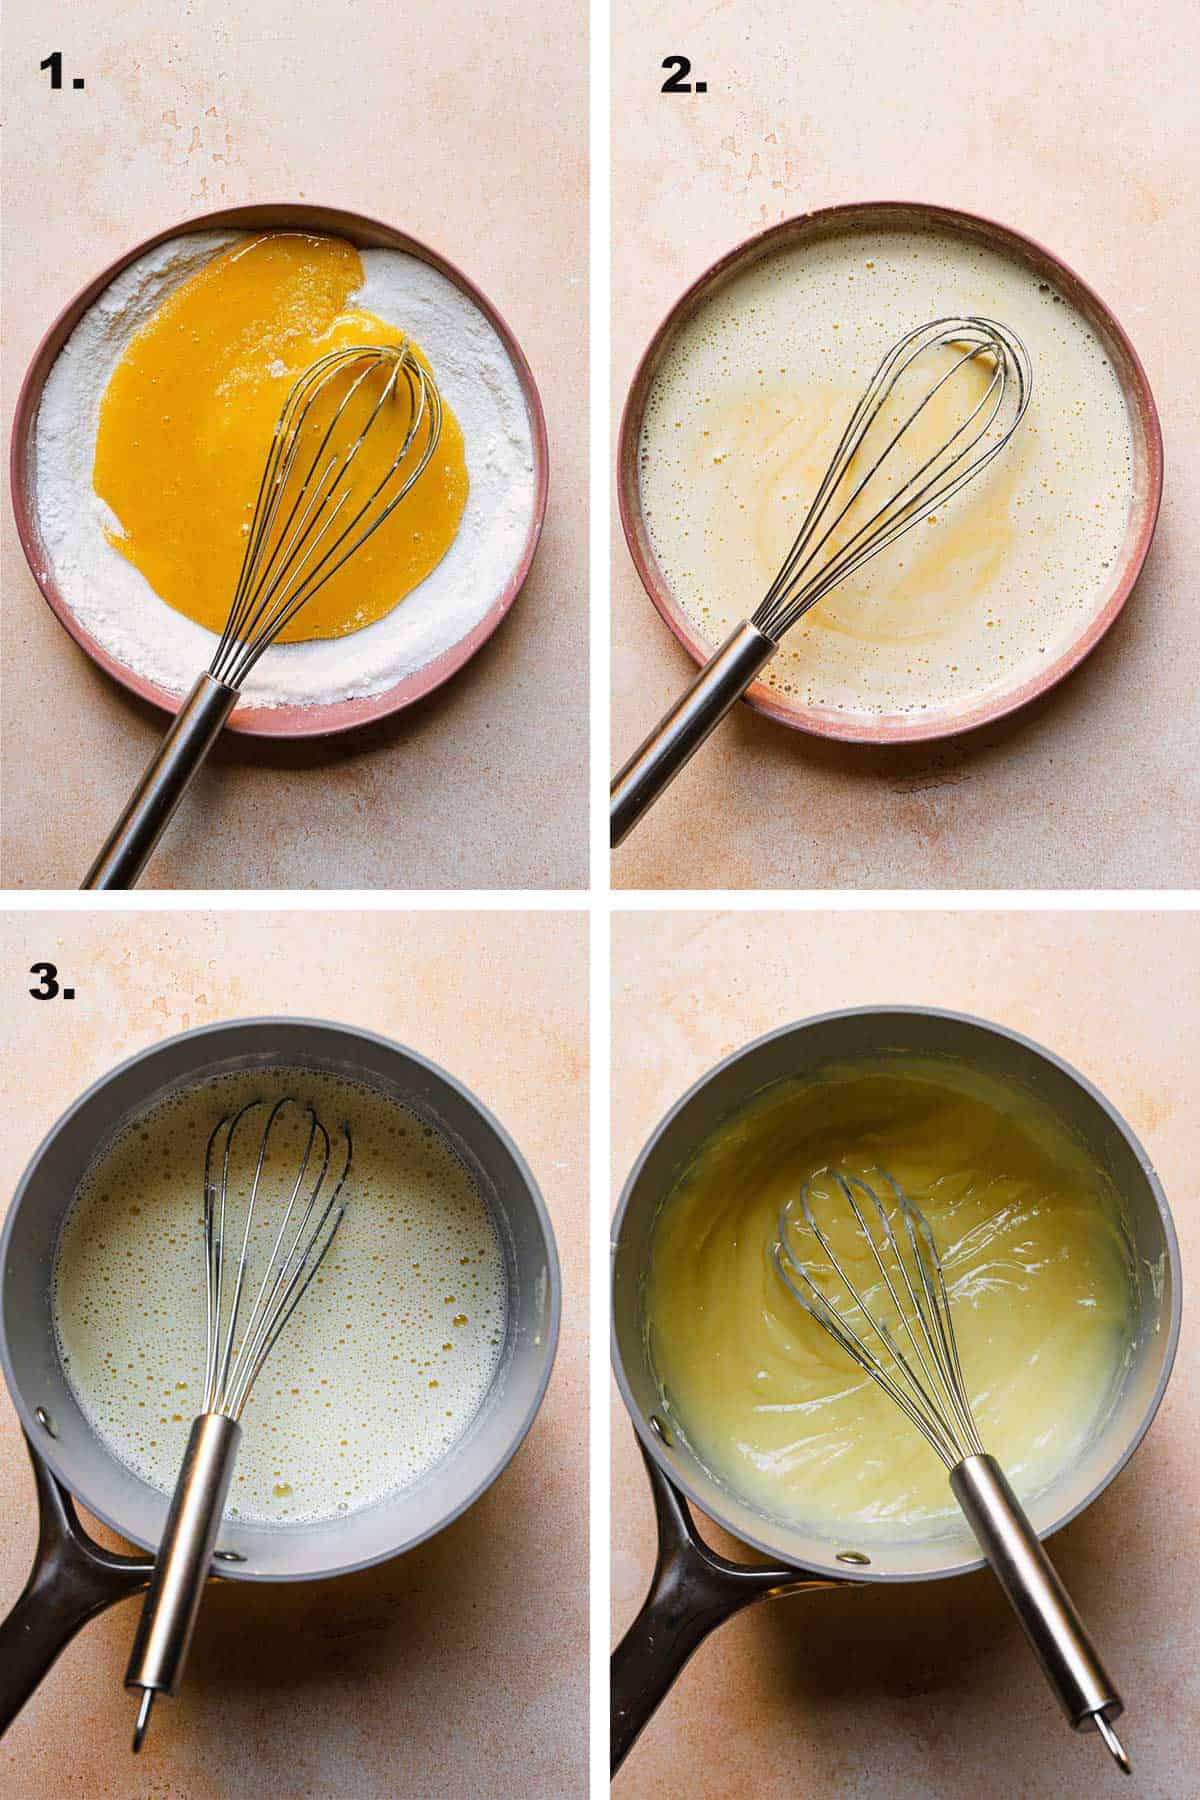 How to make pastry cream